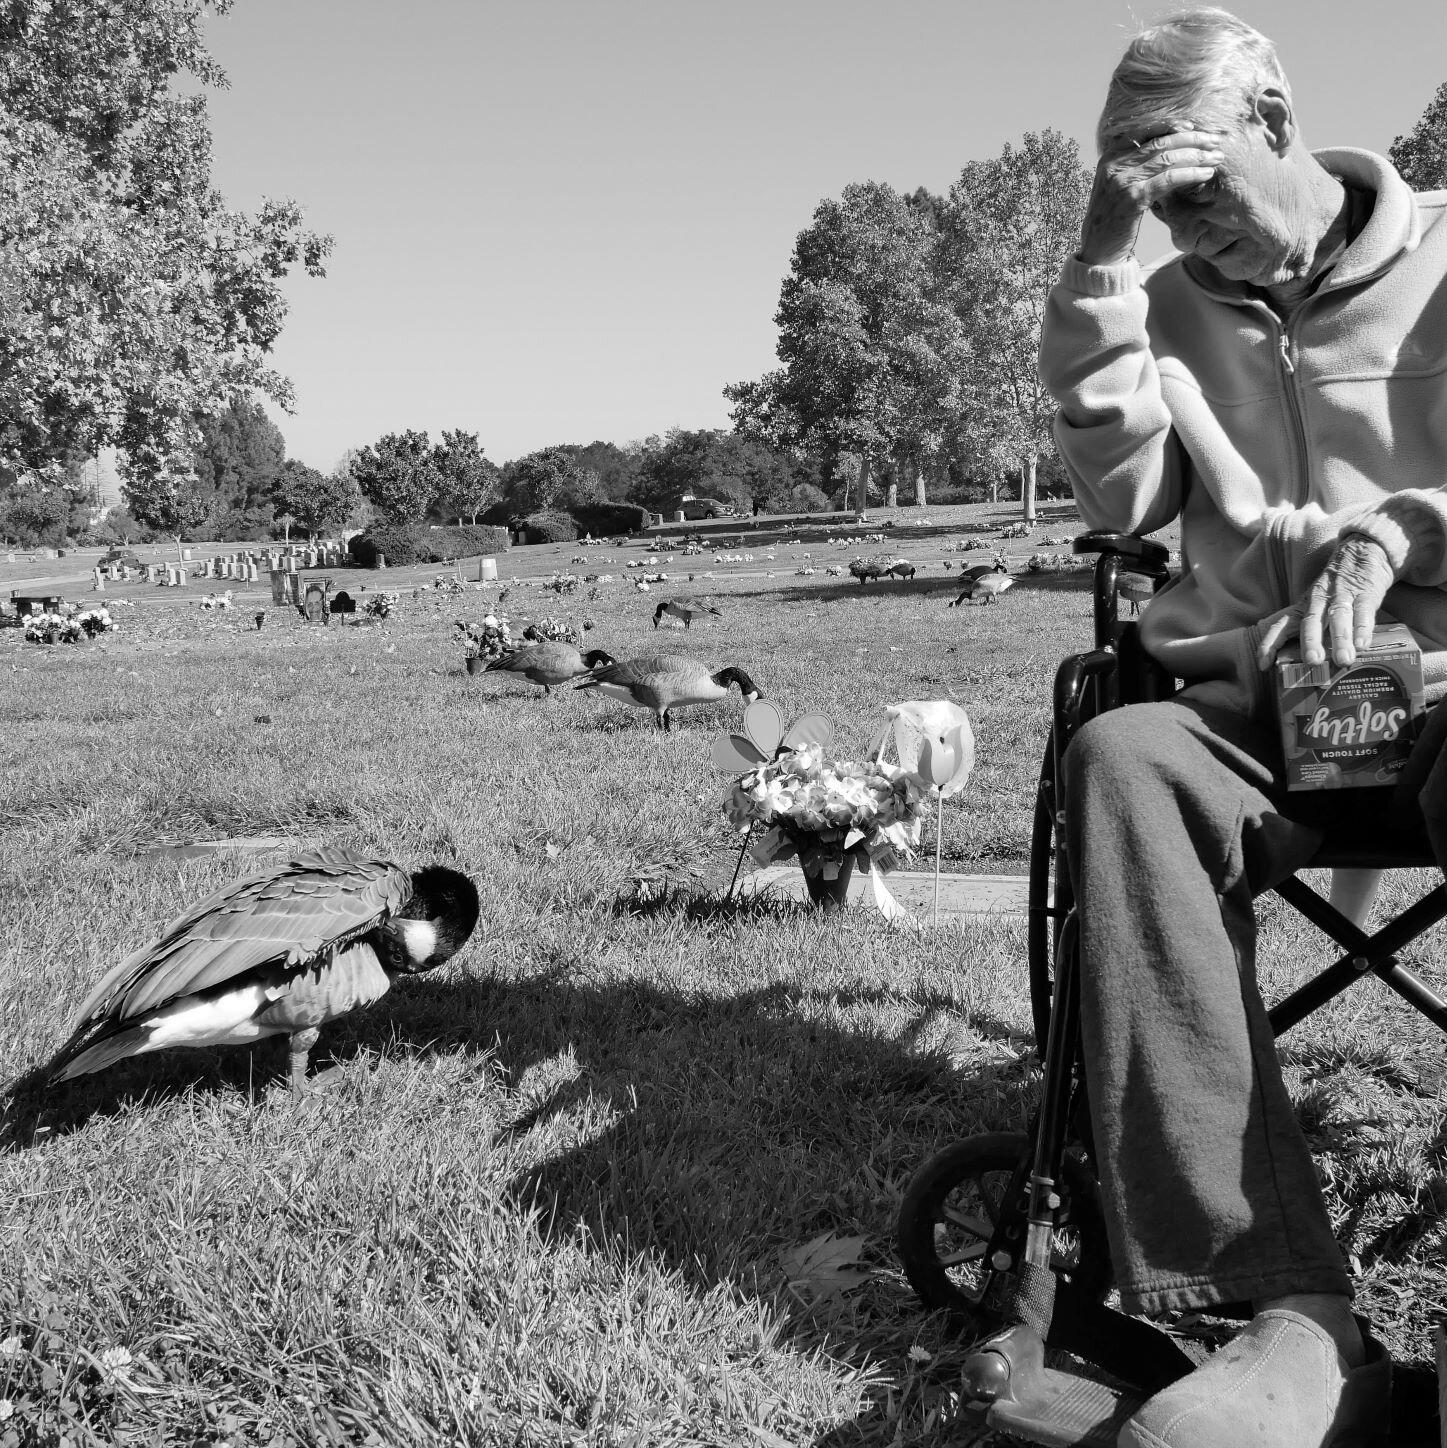 Graveside with grief, grandad, and geese. 

#griefjourney #geese #graveside